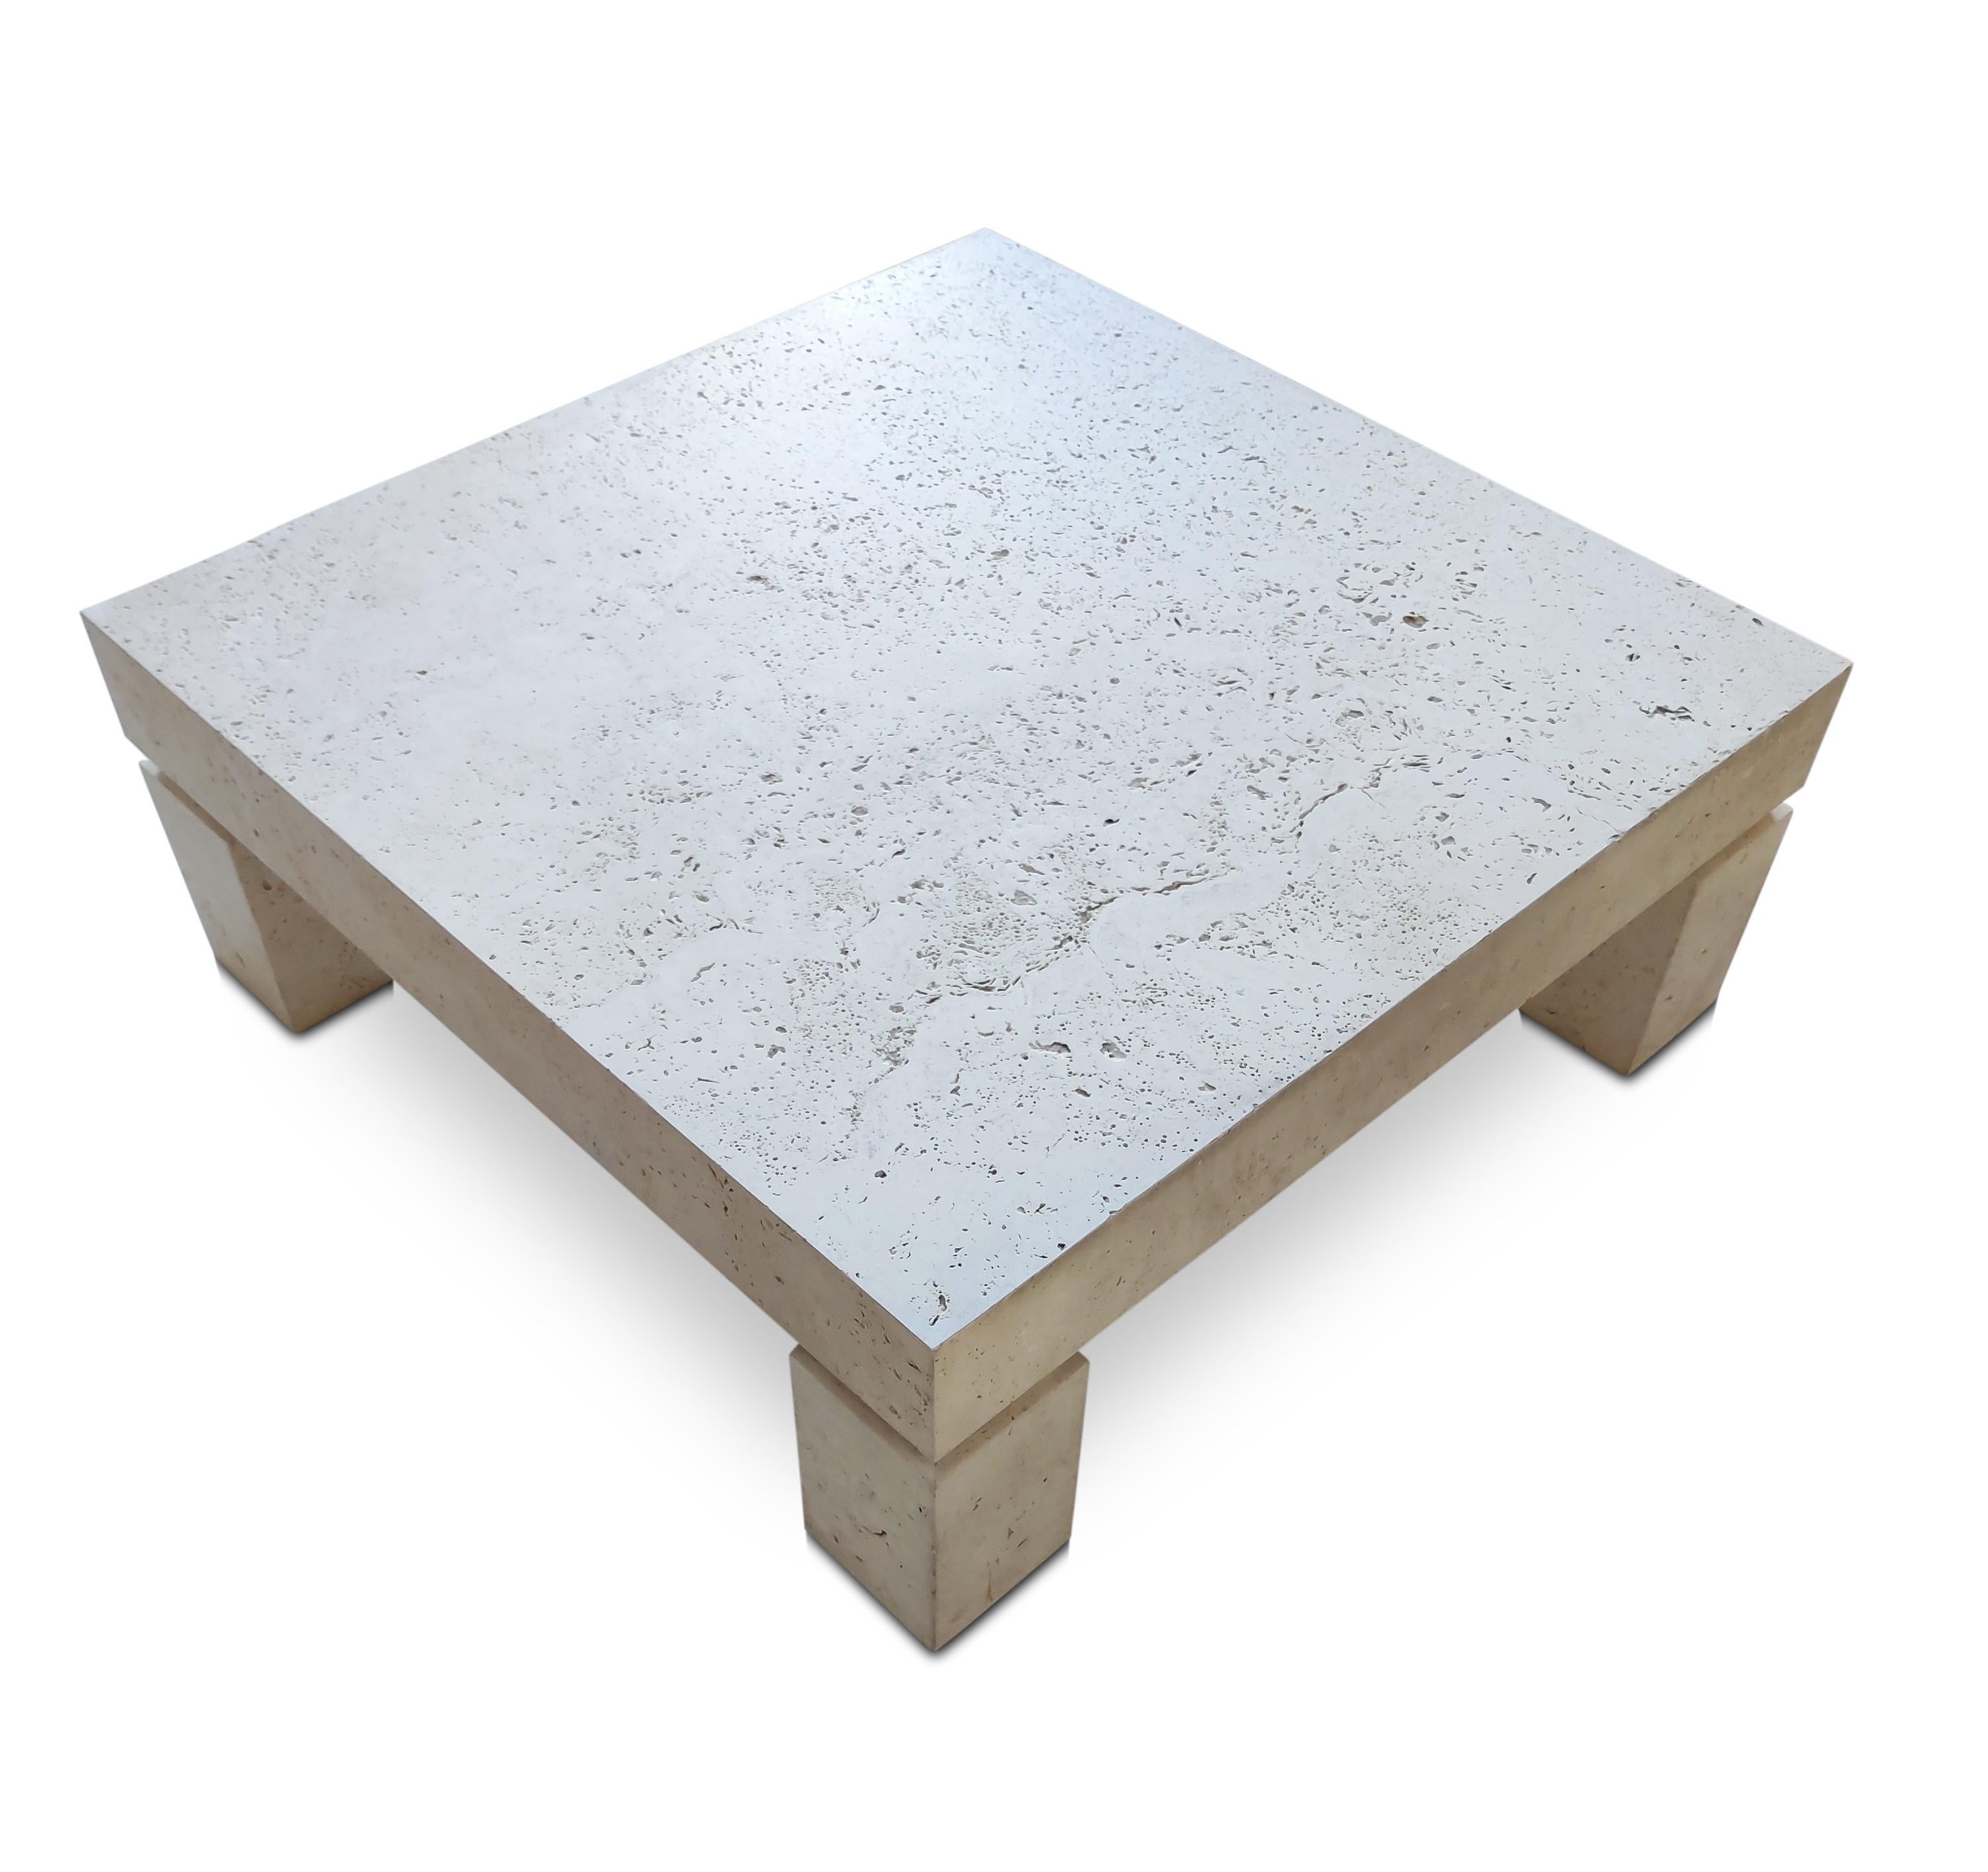 Likely designed and manufactured by Stone International in Italy circa 1980s, this natural travertine coffee table has an amazing presence. The top and legs have a thick and solid-like construction, lending to what I call a Parsons design profile.